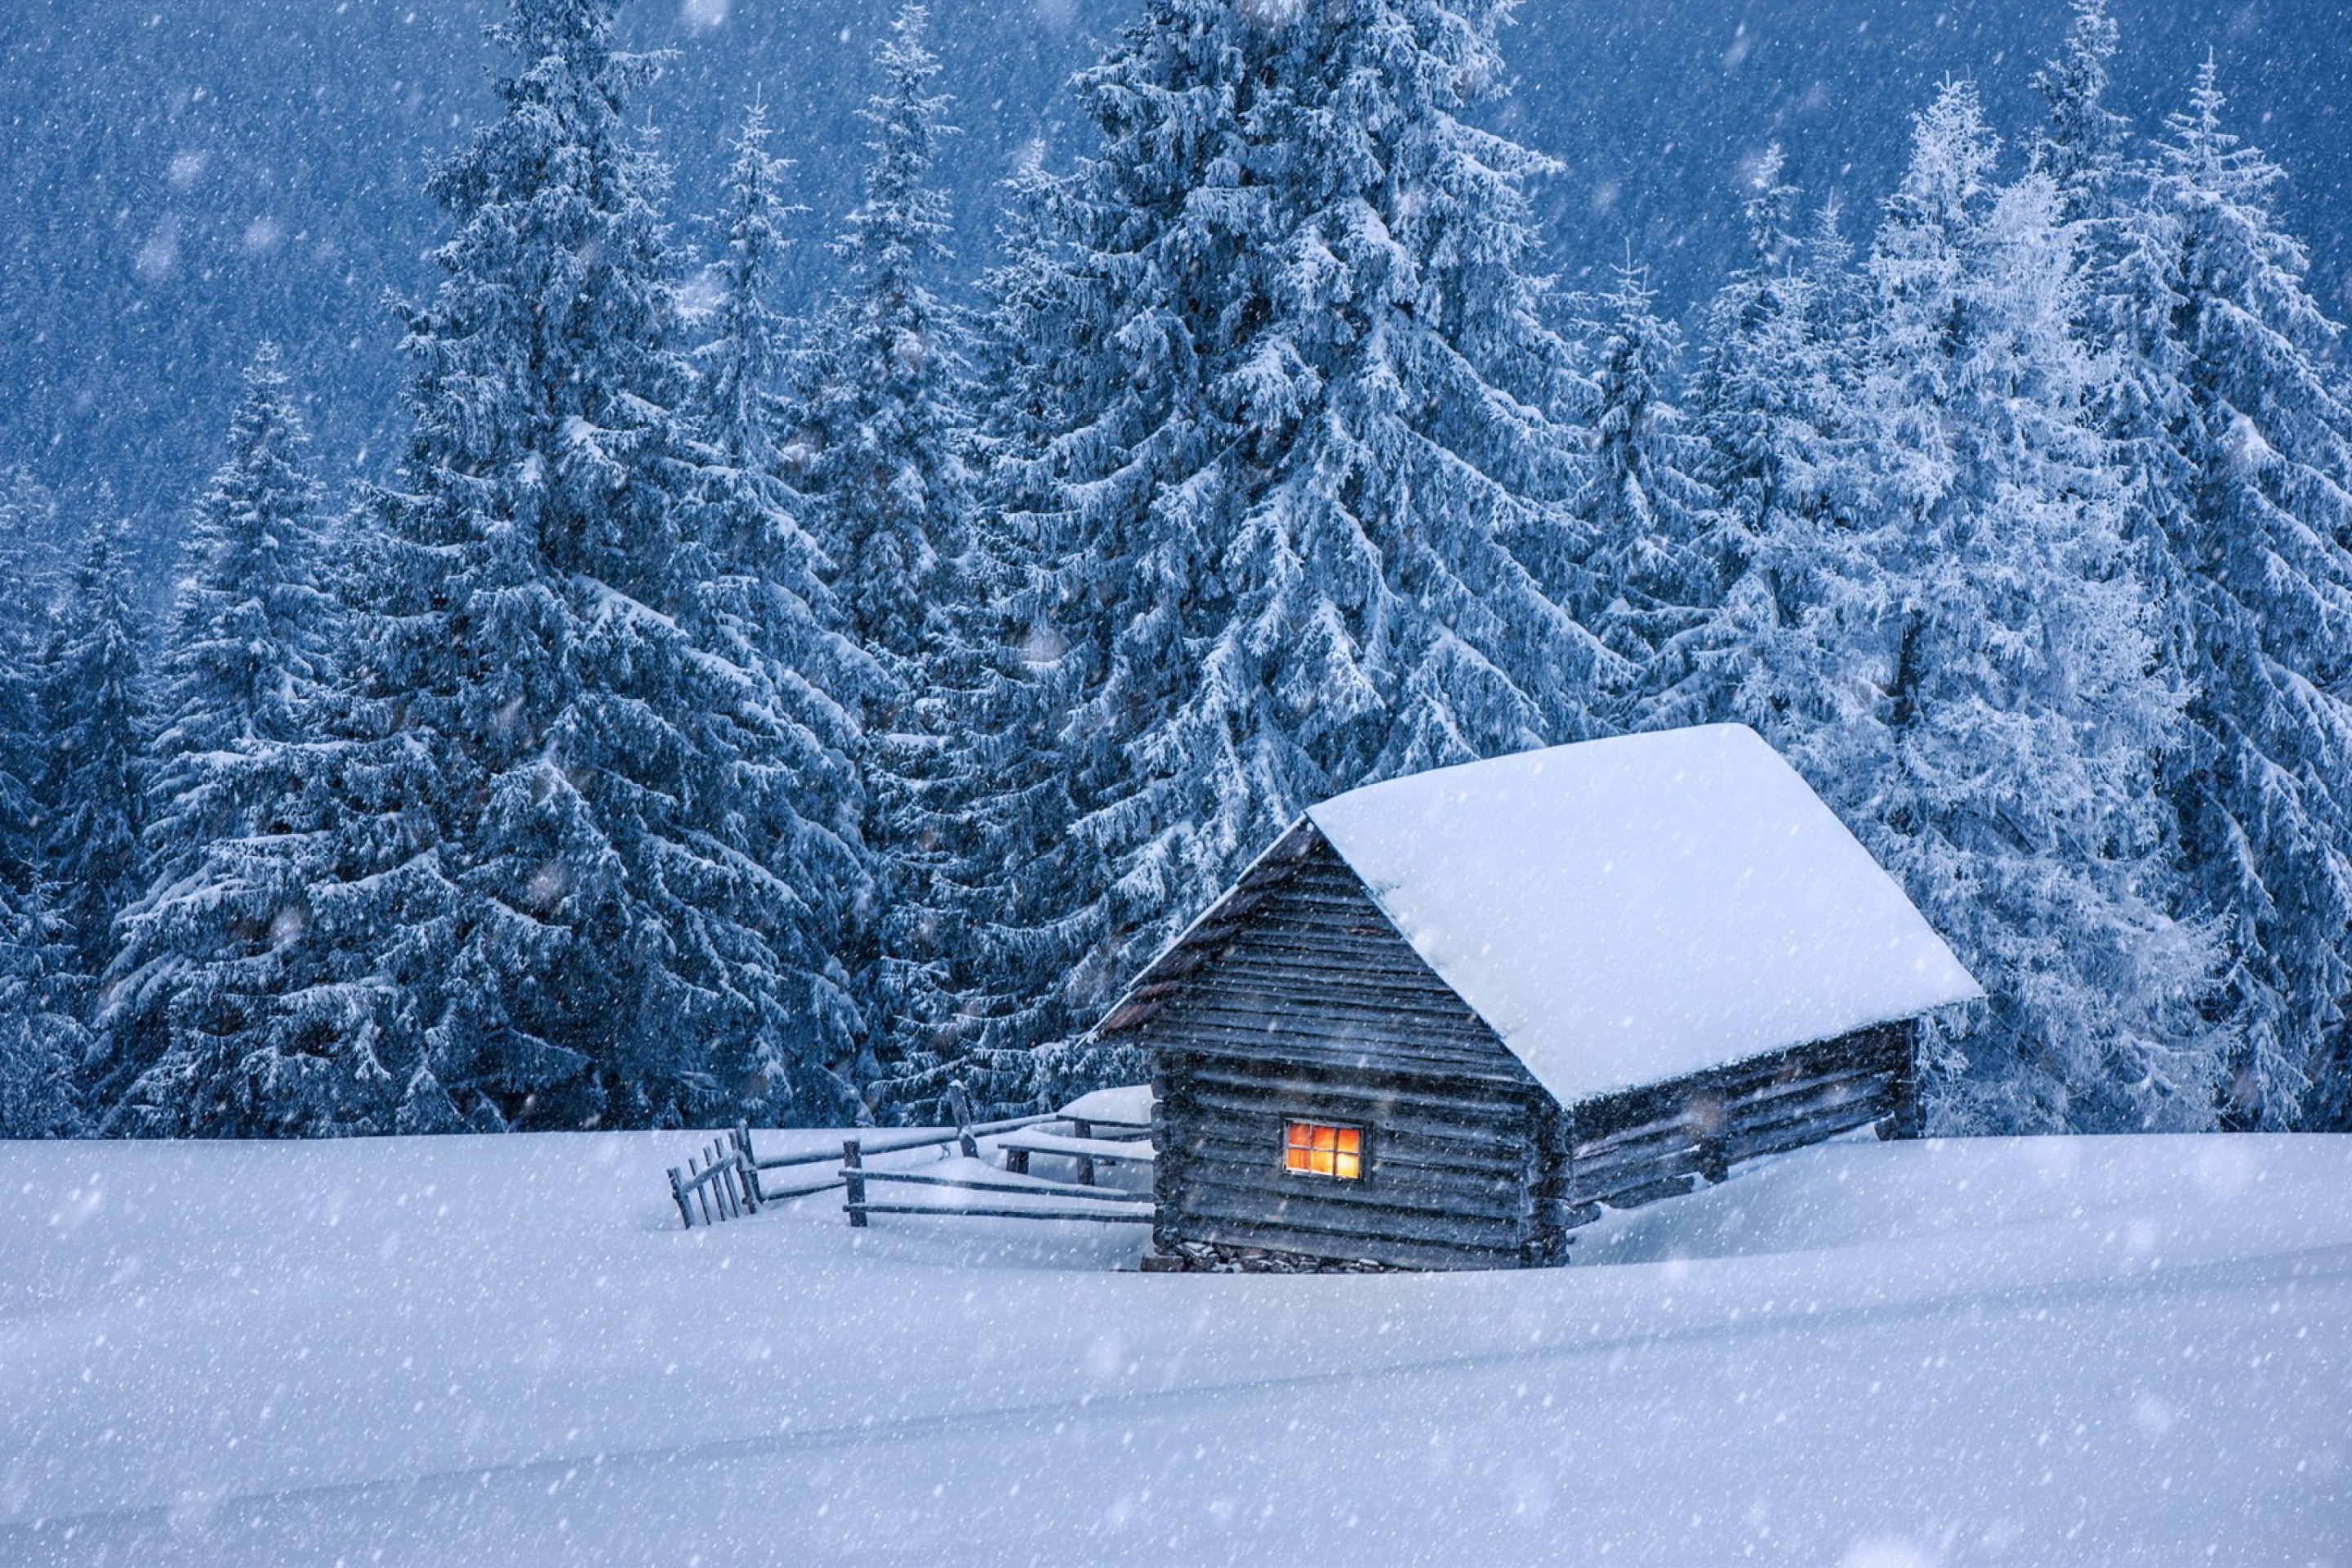 House in winter forest wallpaper 2880x1920